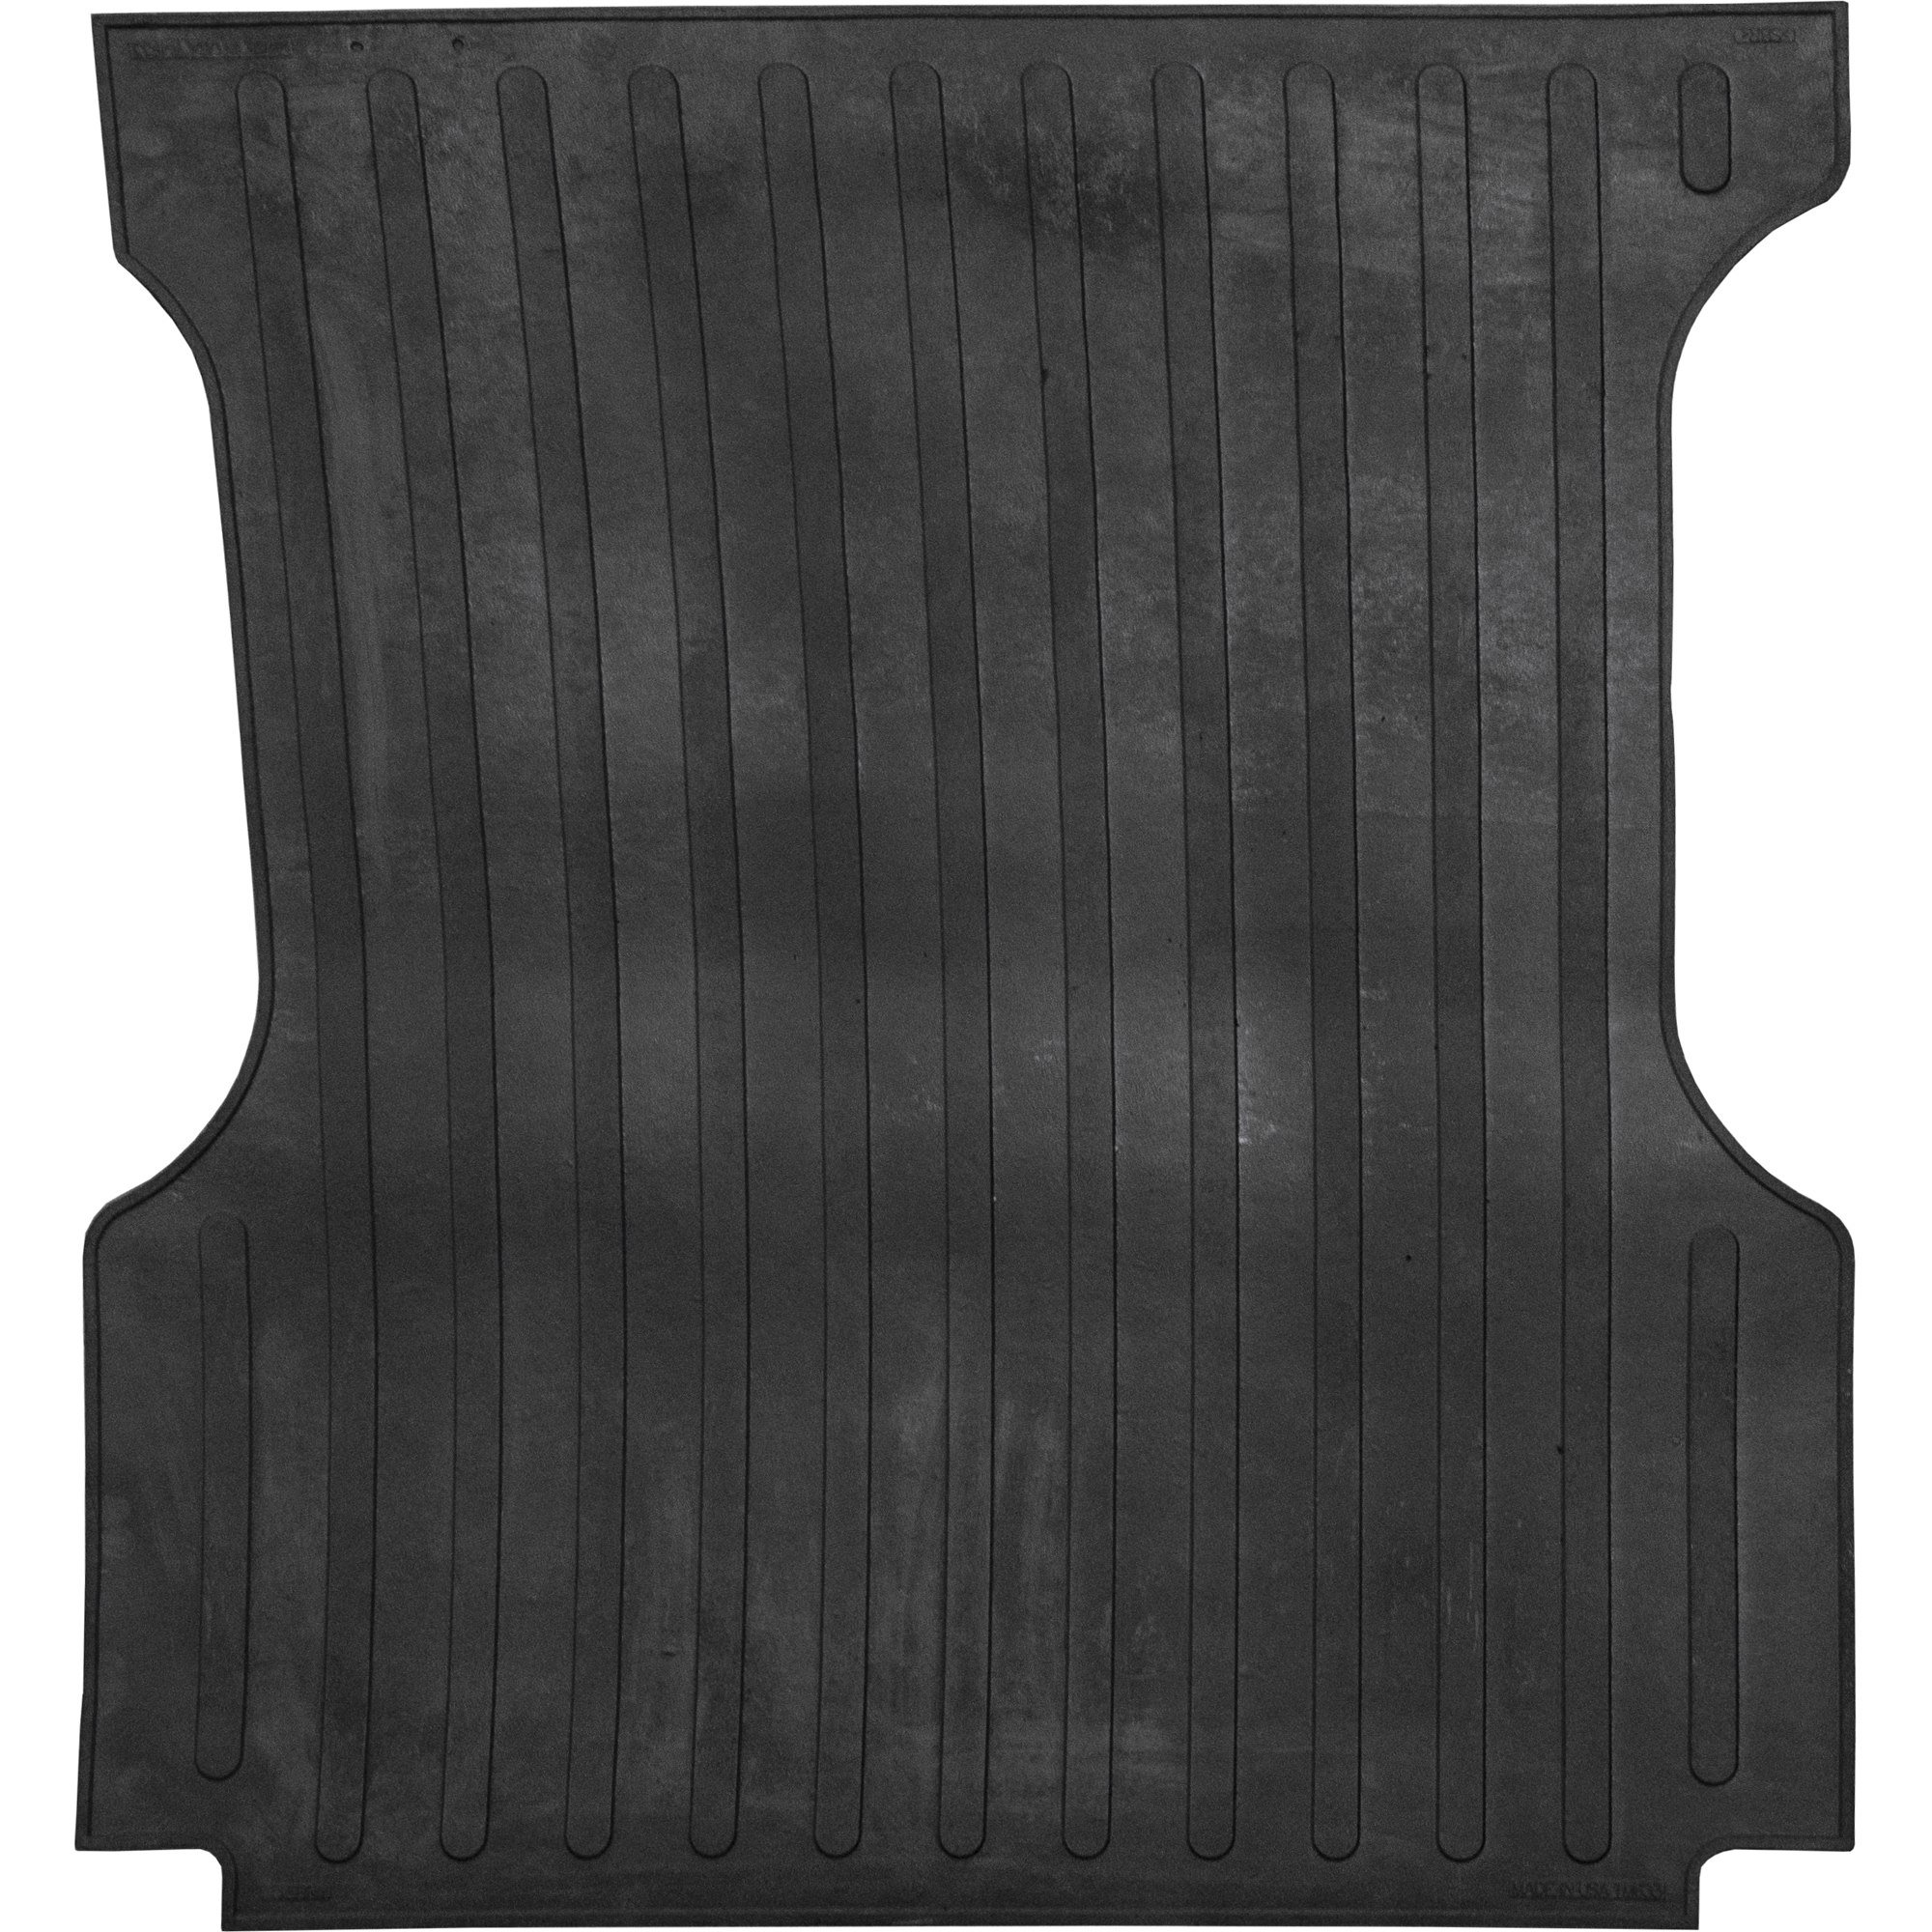 Boomerang Rubber, Chevy/GMC/Sierra 1500-3500 Yr 1999-2006 Bed Mat, 8ft. Long, Primary Color Black, Model TM580BAGGED